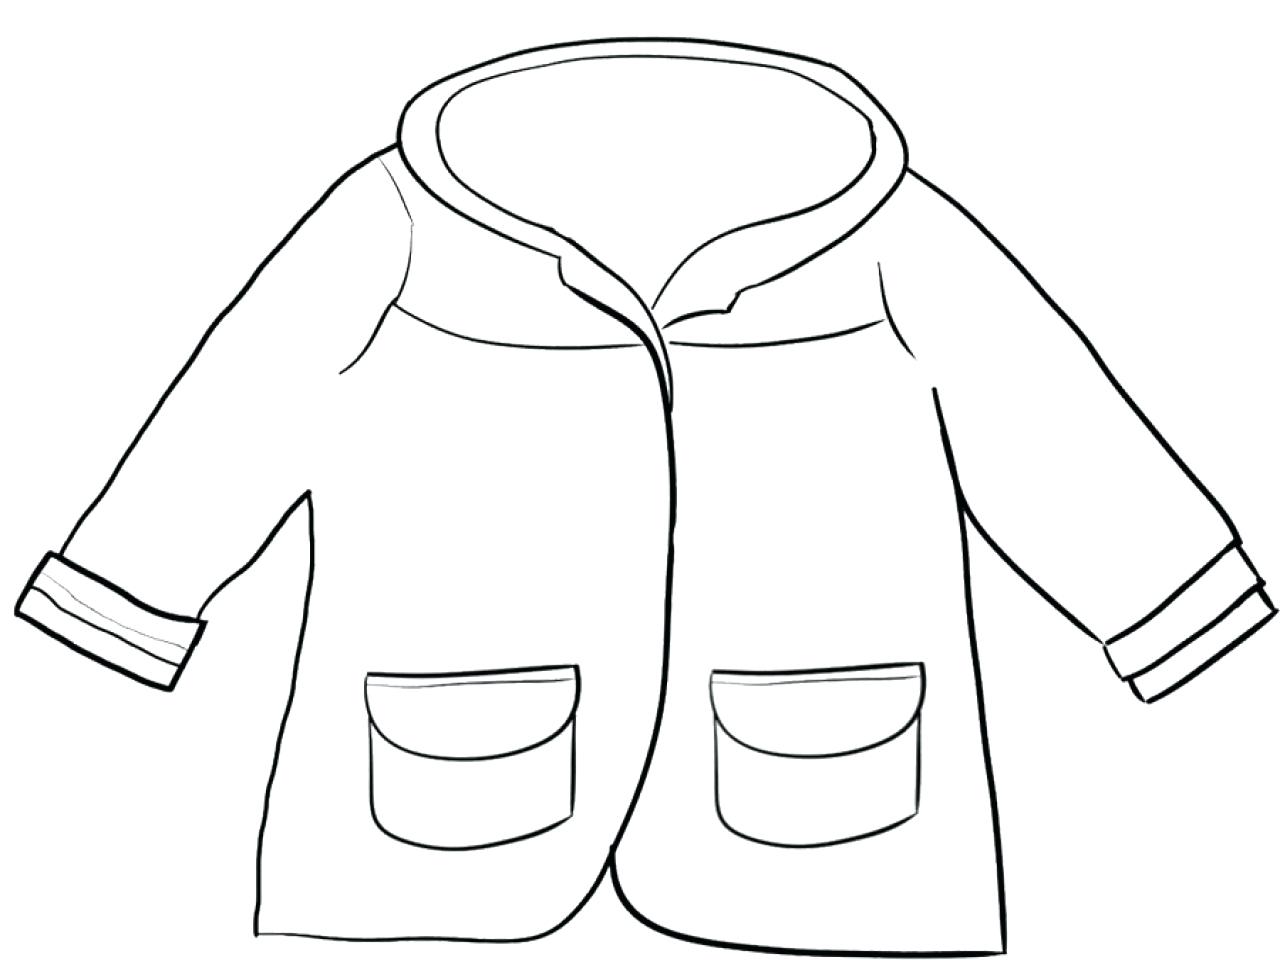 Yellow Jacket Coloring Page at GetColorings.com | Free printable ...